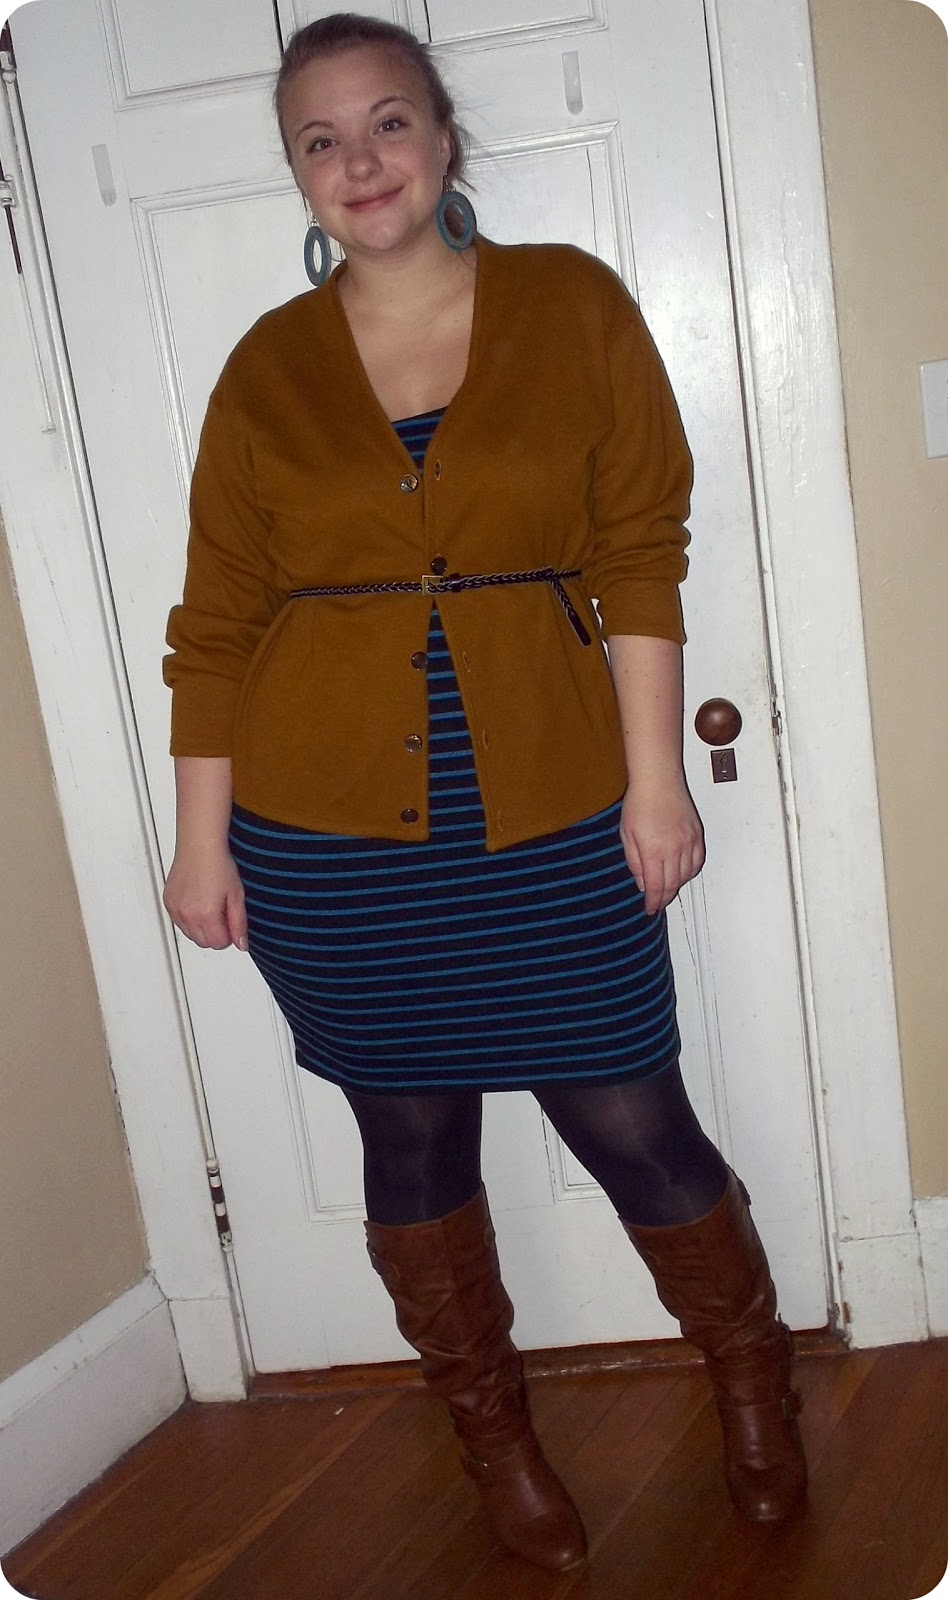 Hips and Hangers: Mustard and teal